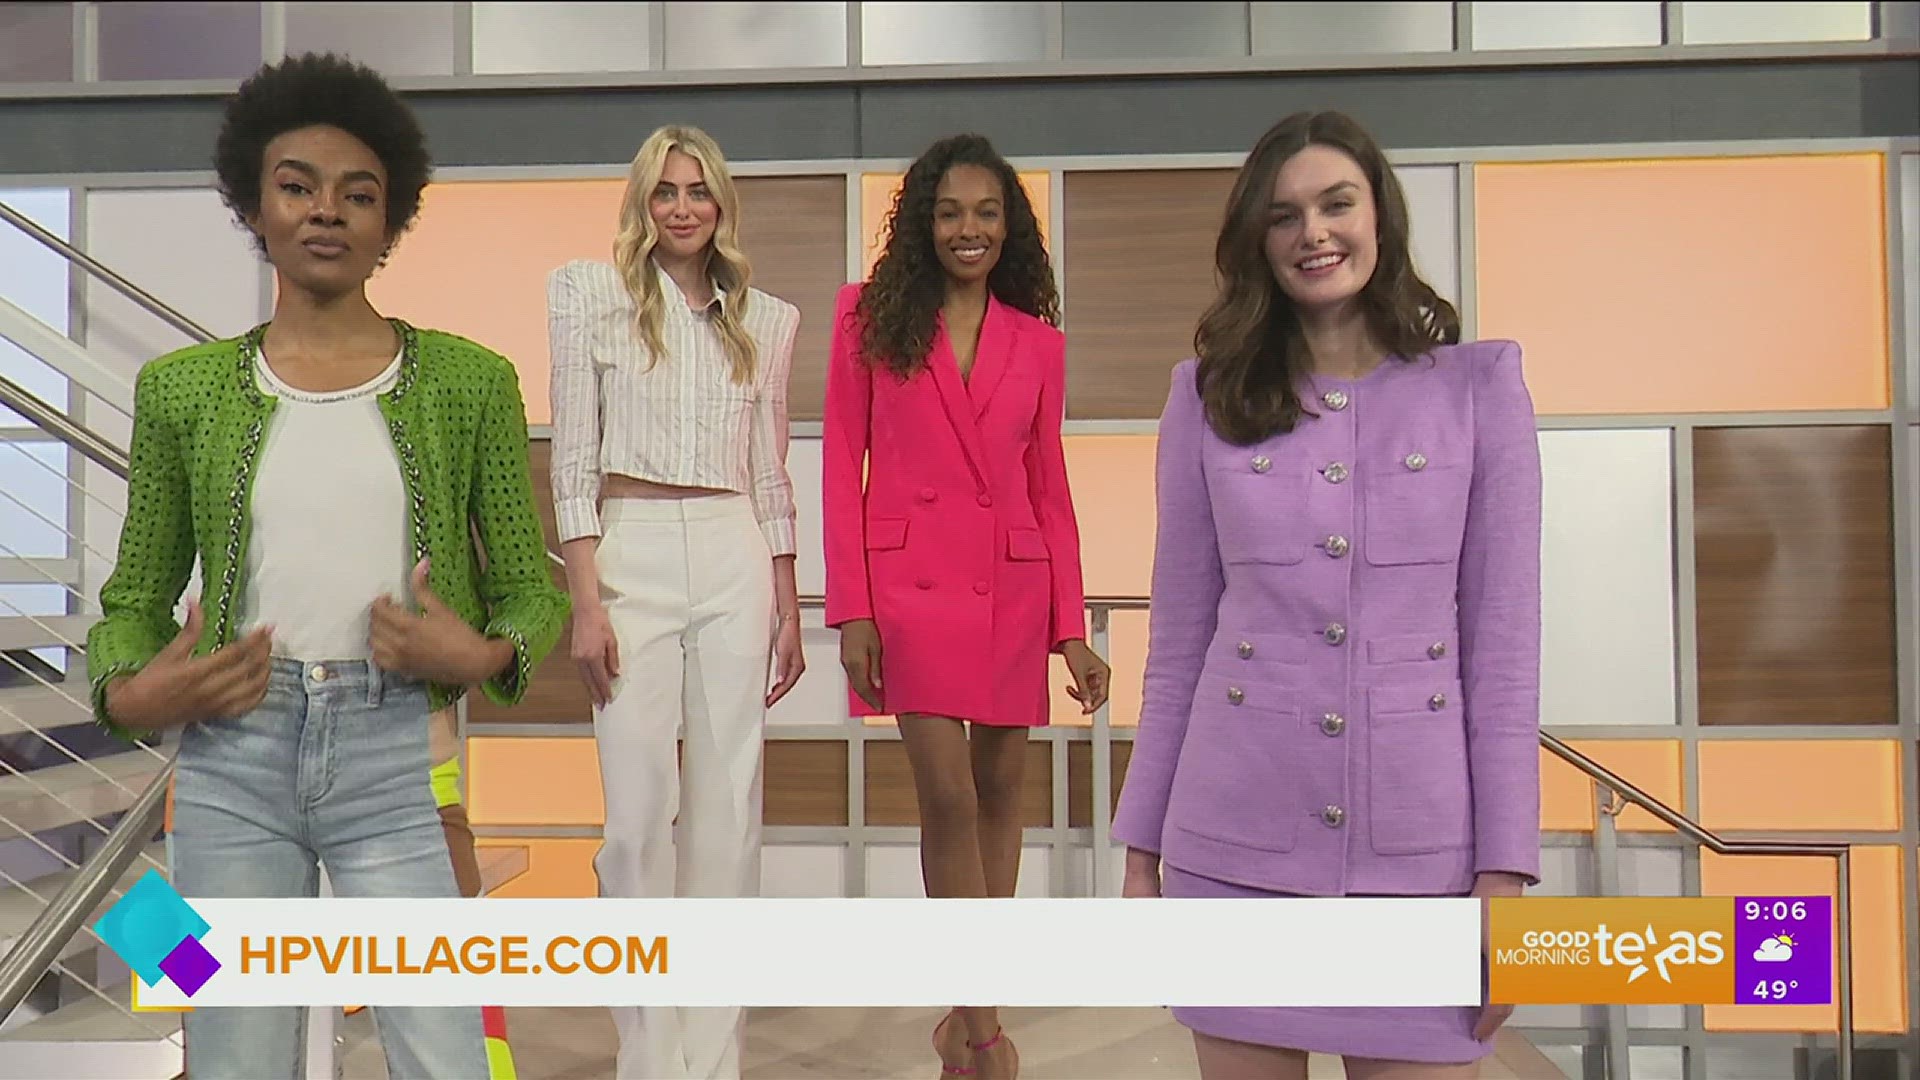 Victoria Snee of Highland Park Village brings modern takes on blazers, blouses and jackets with shoulder pads